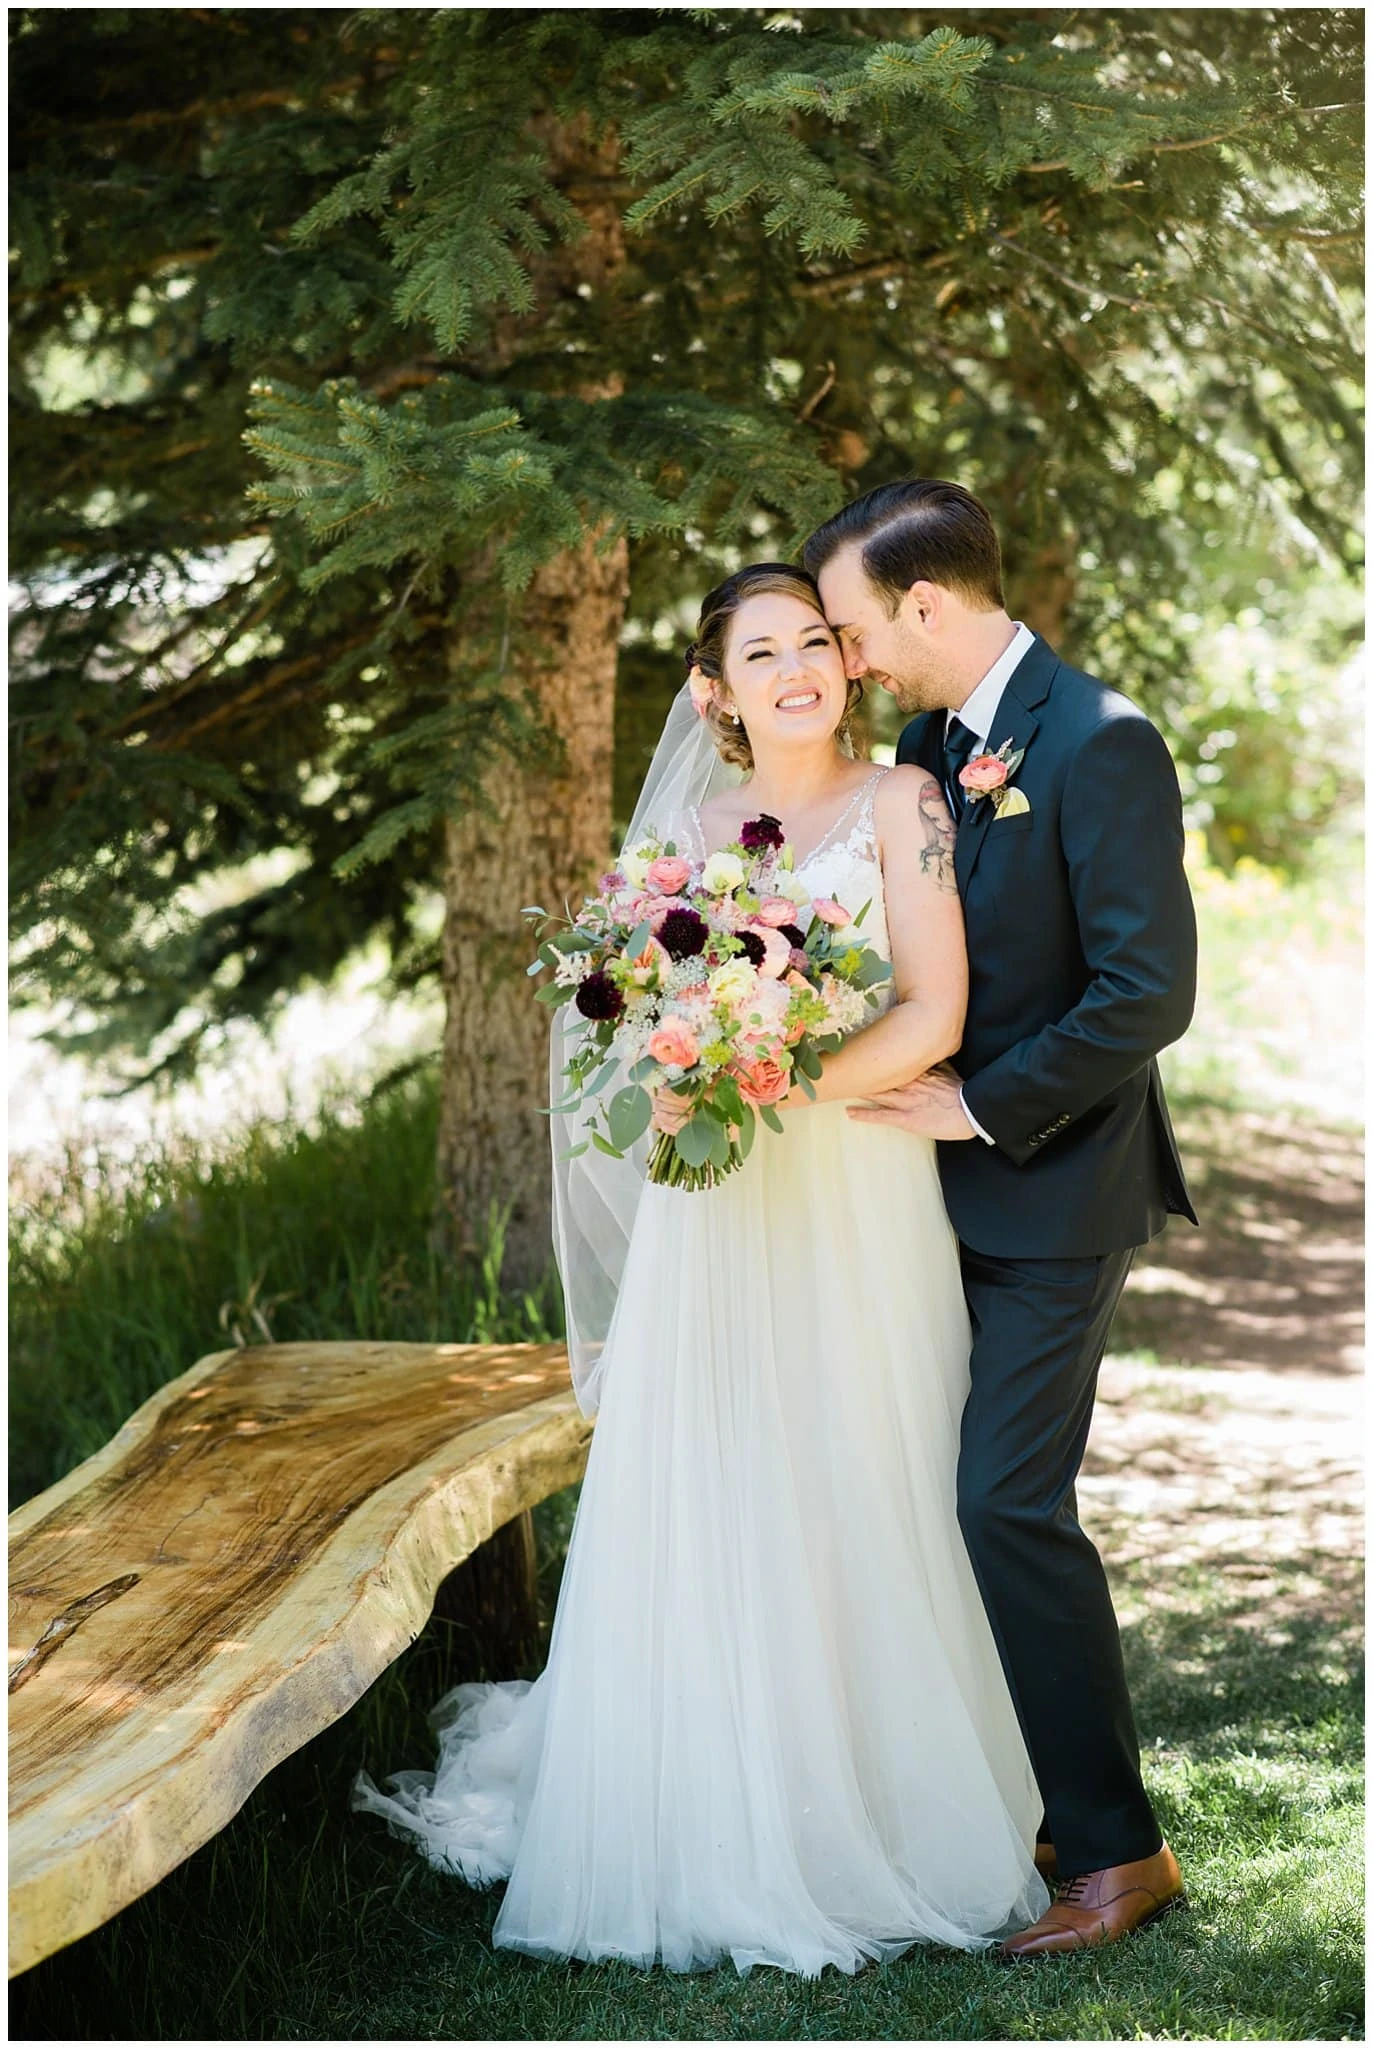 Bride and groom cuddling at Sonnenalp Hotel Vail Colorado Wedding by Aspen Wedding Photographer Jennie Crate